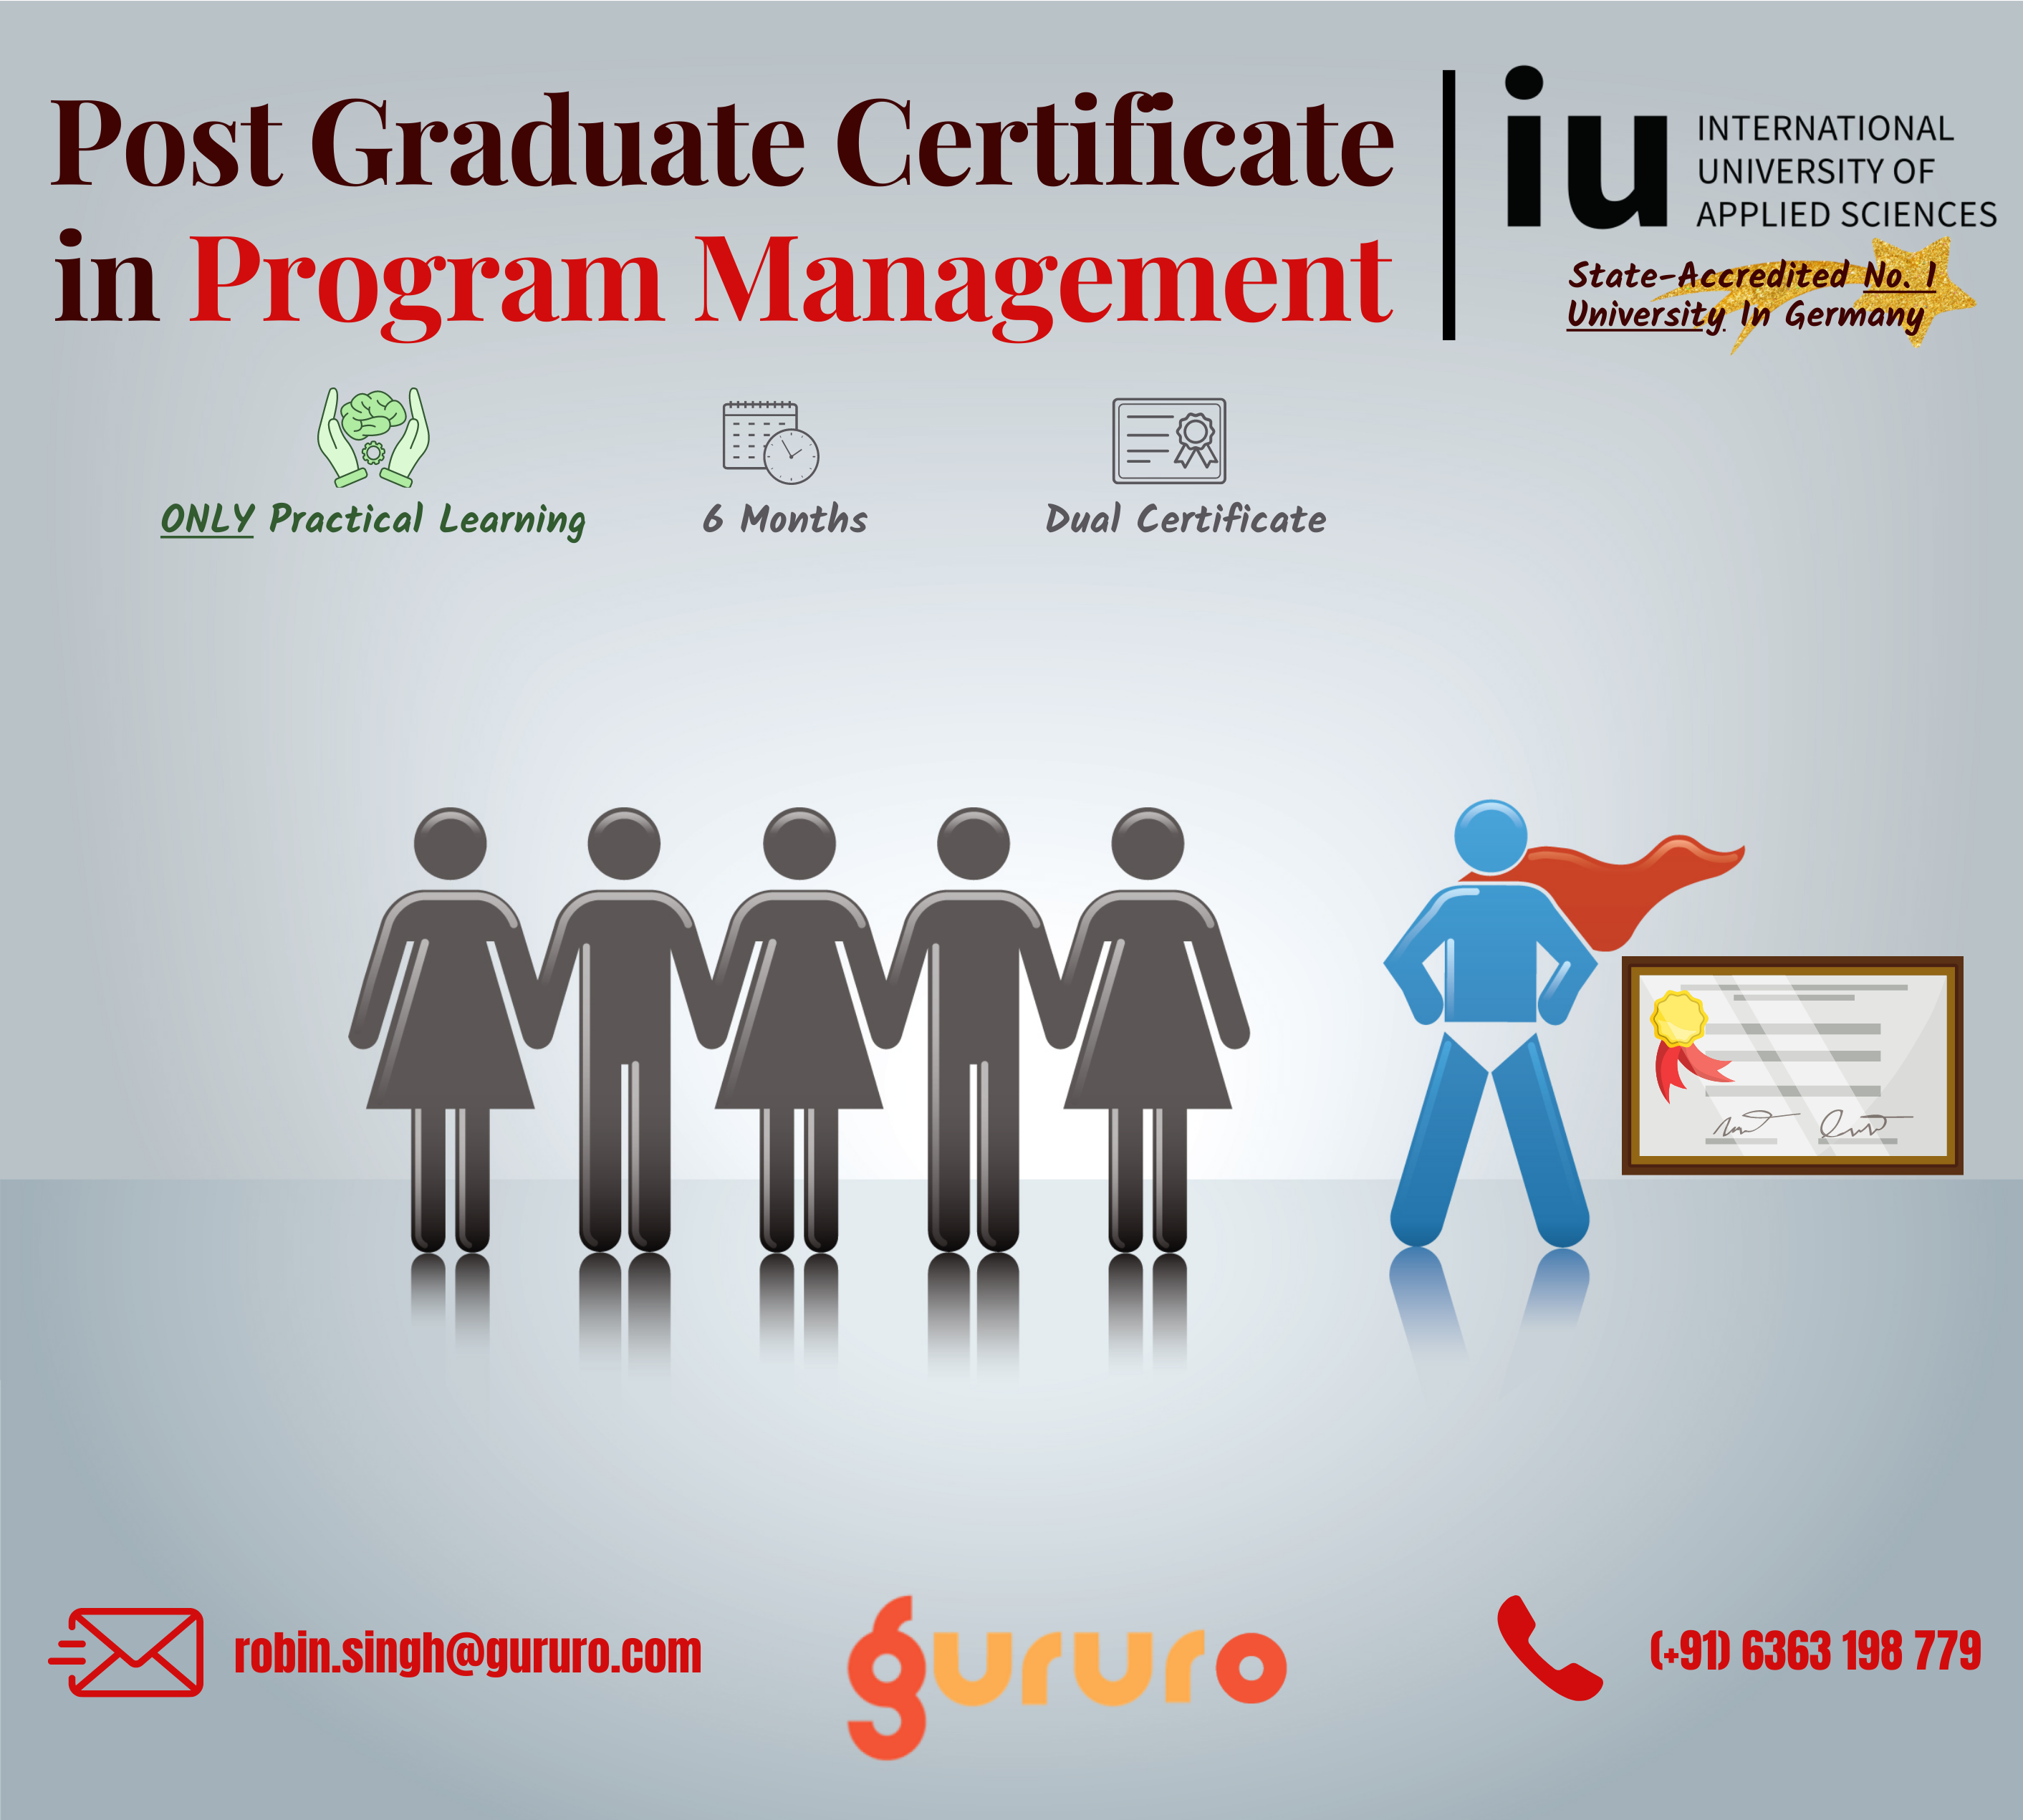 Gururo.com collaborates with IU University, Germany to Offer World-Class Post Graduate certificate in Program Management